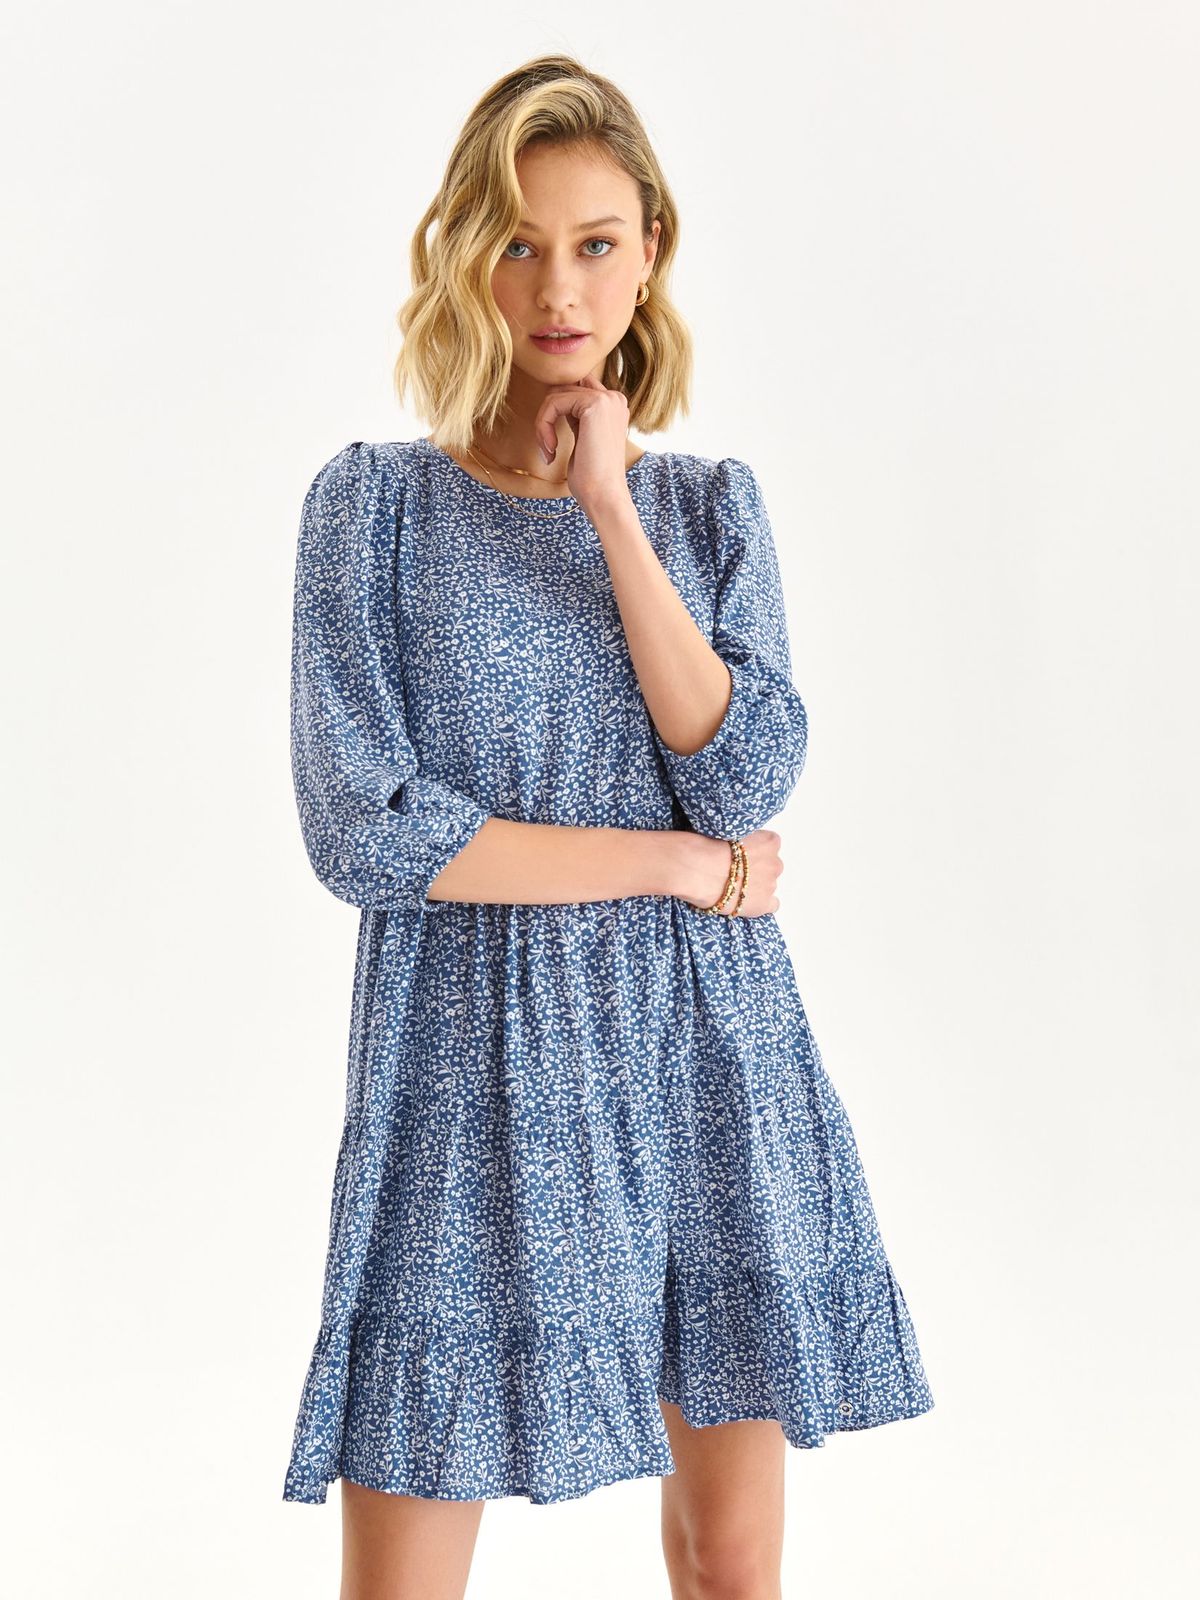 Blue dress short cut loose fit thin fabric with puffed sleeves